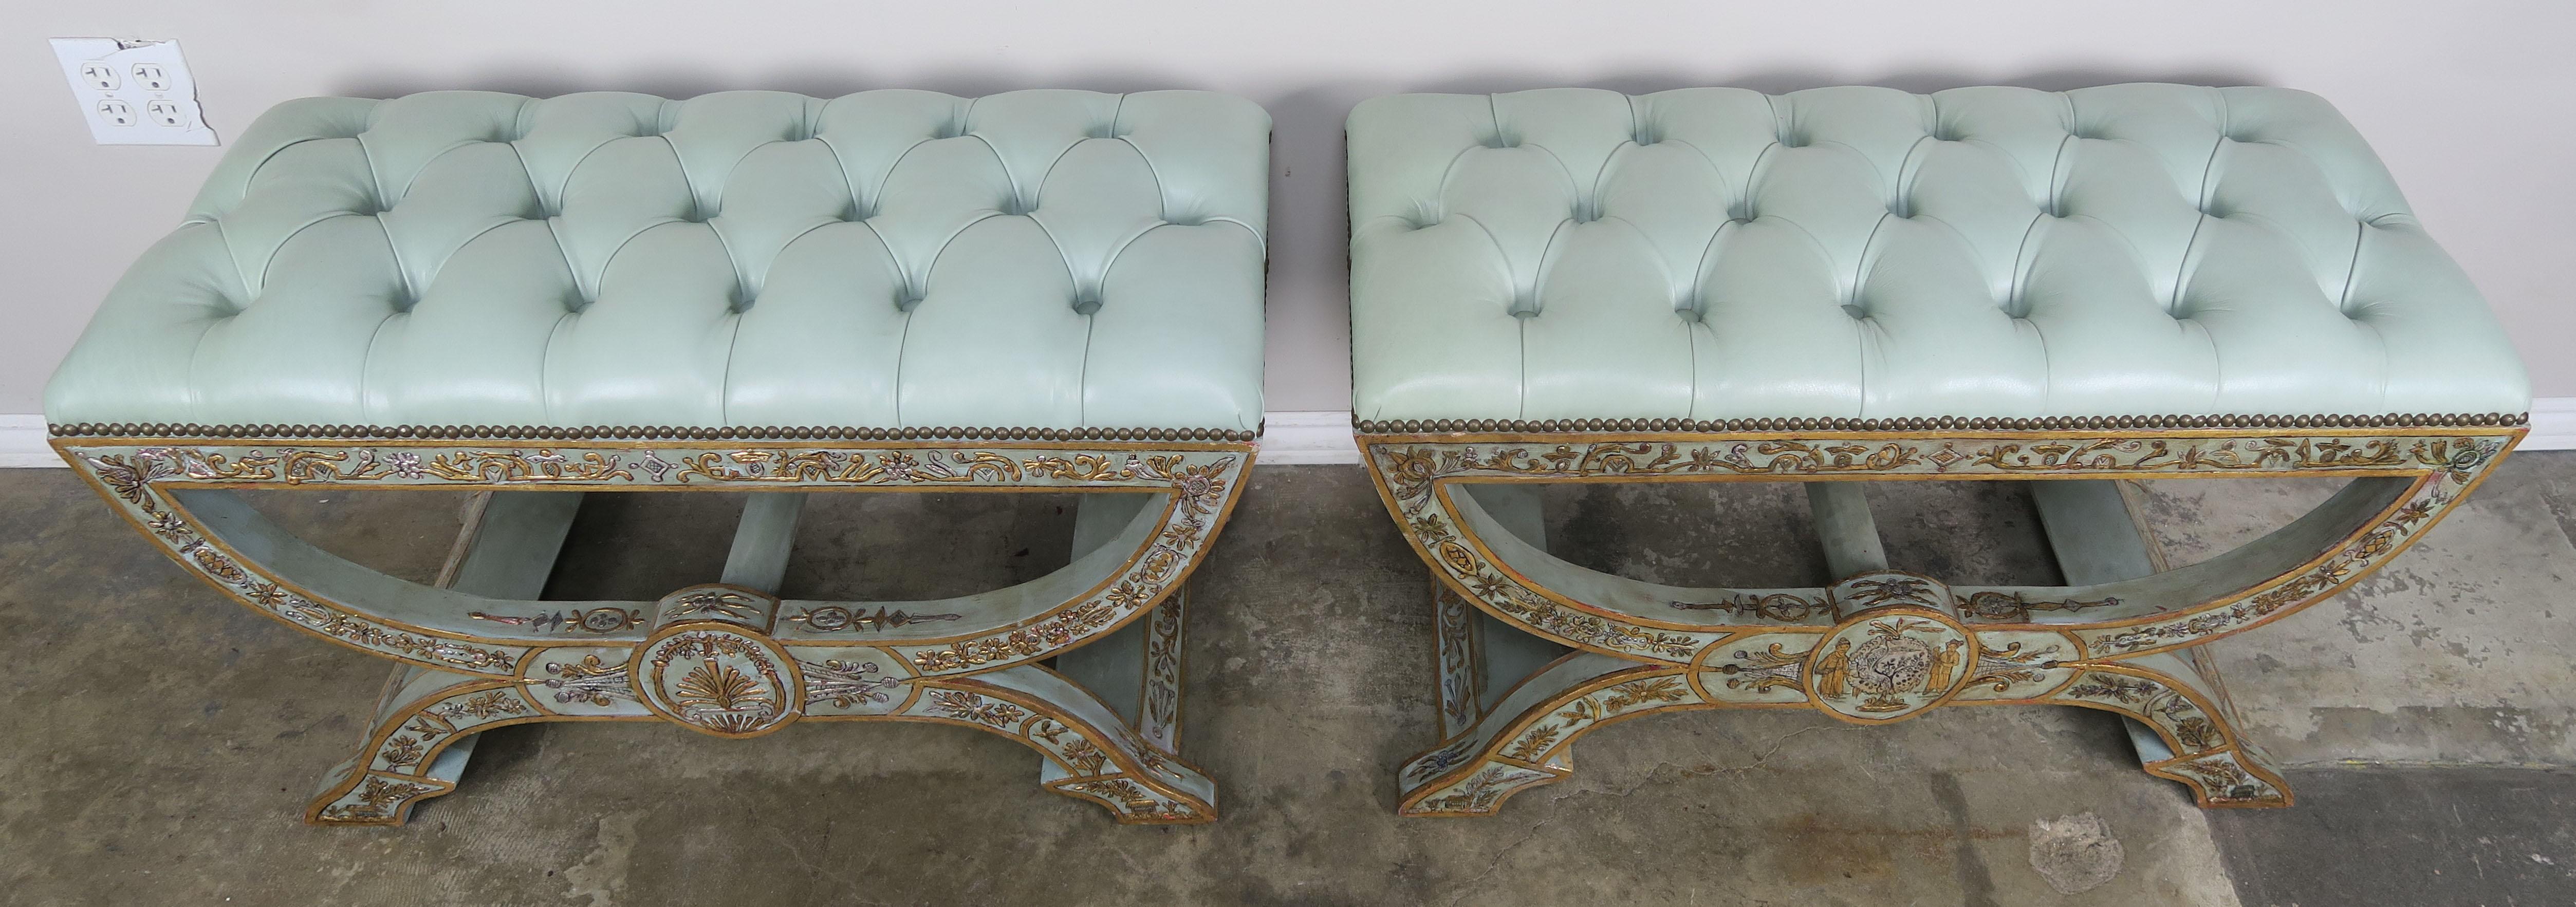 Pair of hand painted benches in gold and silver raised chinoiserie design detailing on a grayish blue background. The benches are upholstered in a tufted soft colored blue leather that coordinates beautifully with the bases of the benches. The